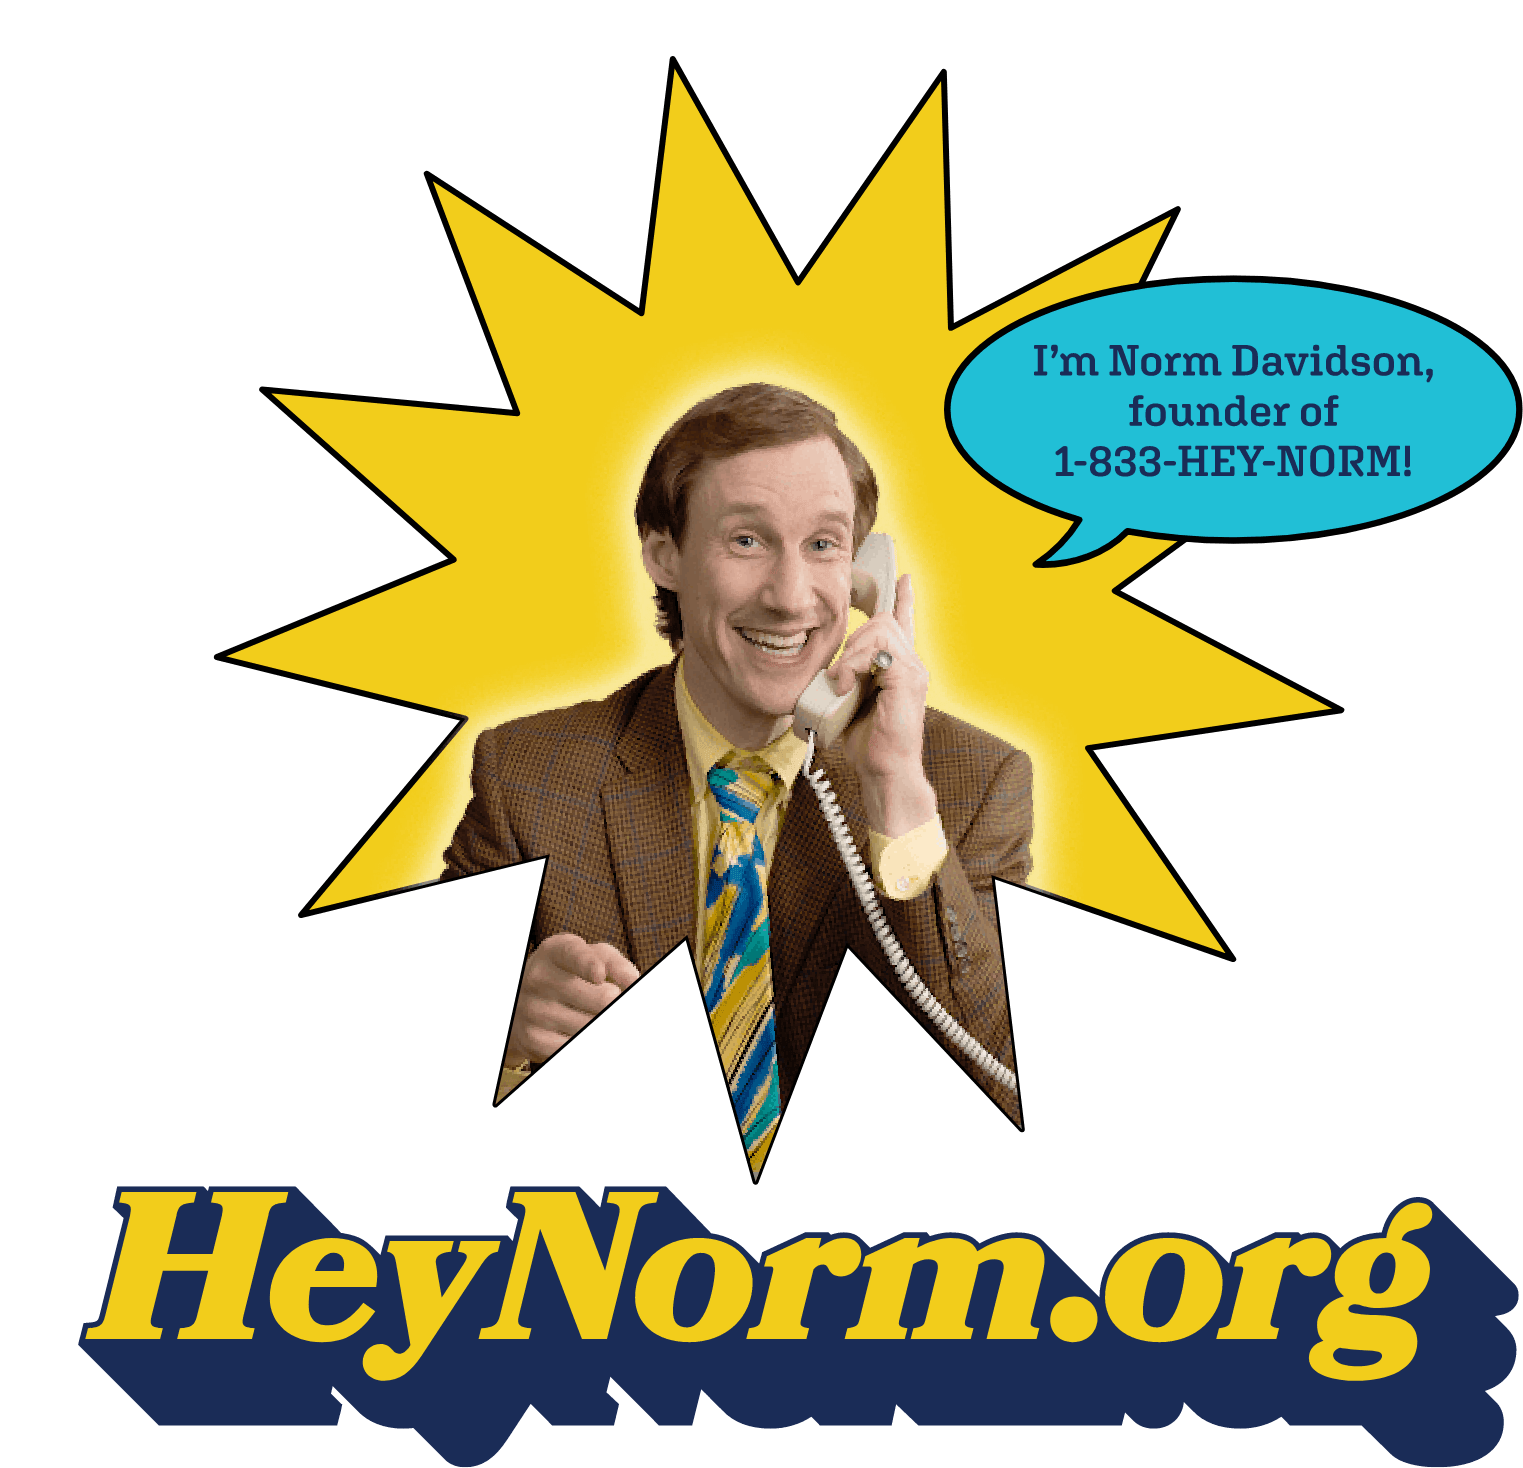 Go to the Hey Norm website